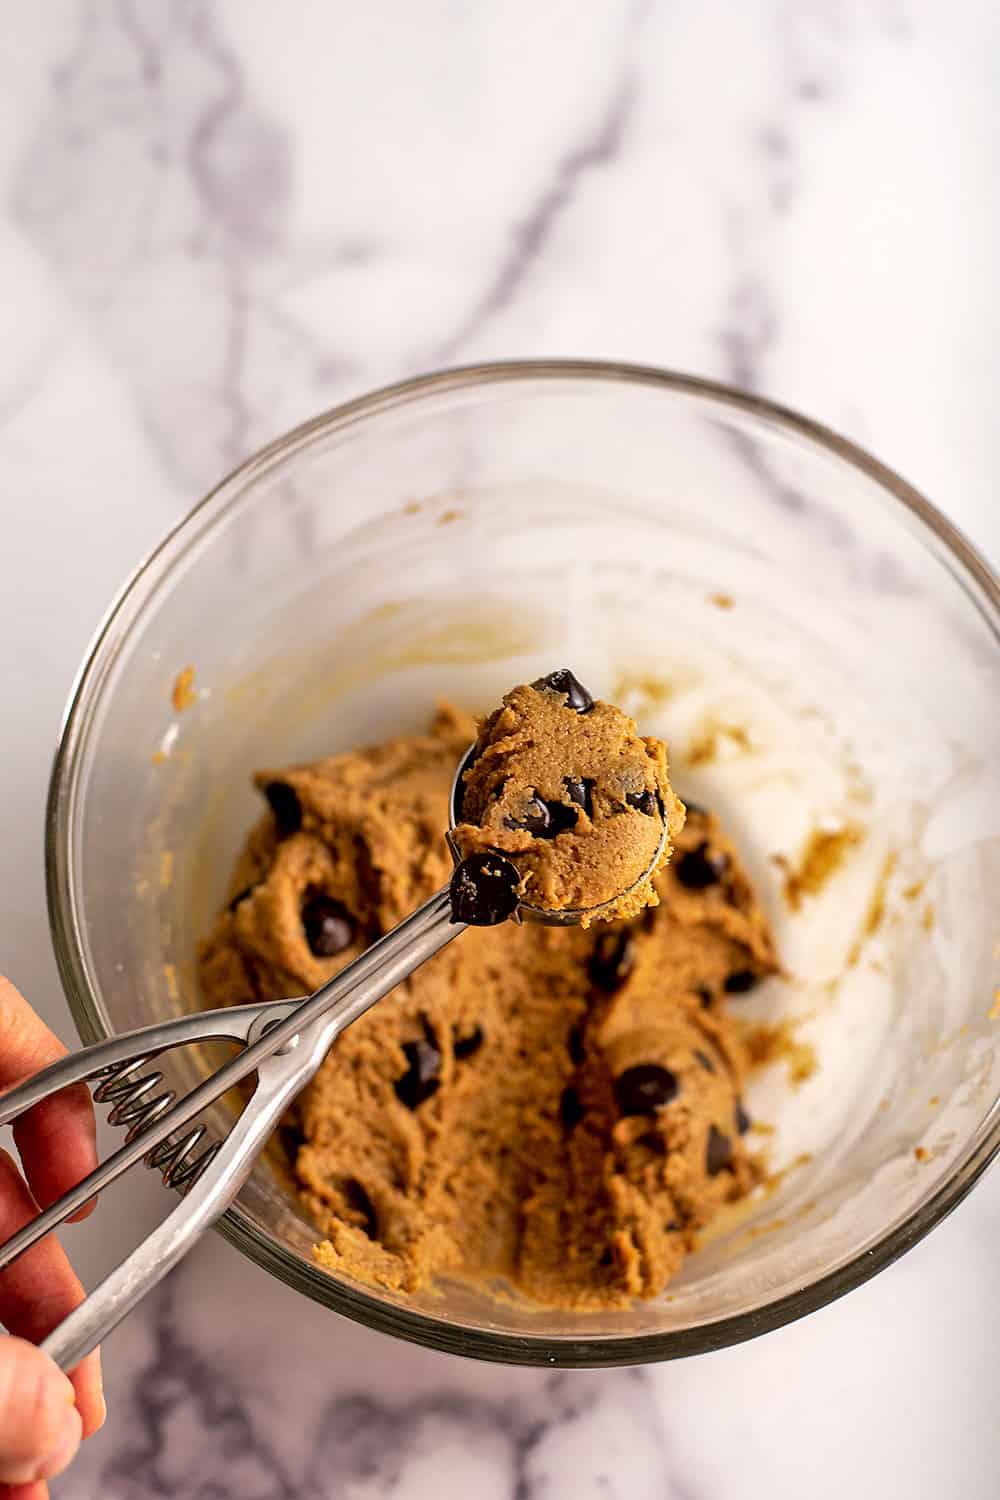 Cookie dough being scooped by a cookie scoop.